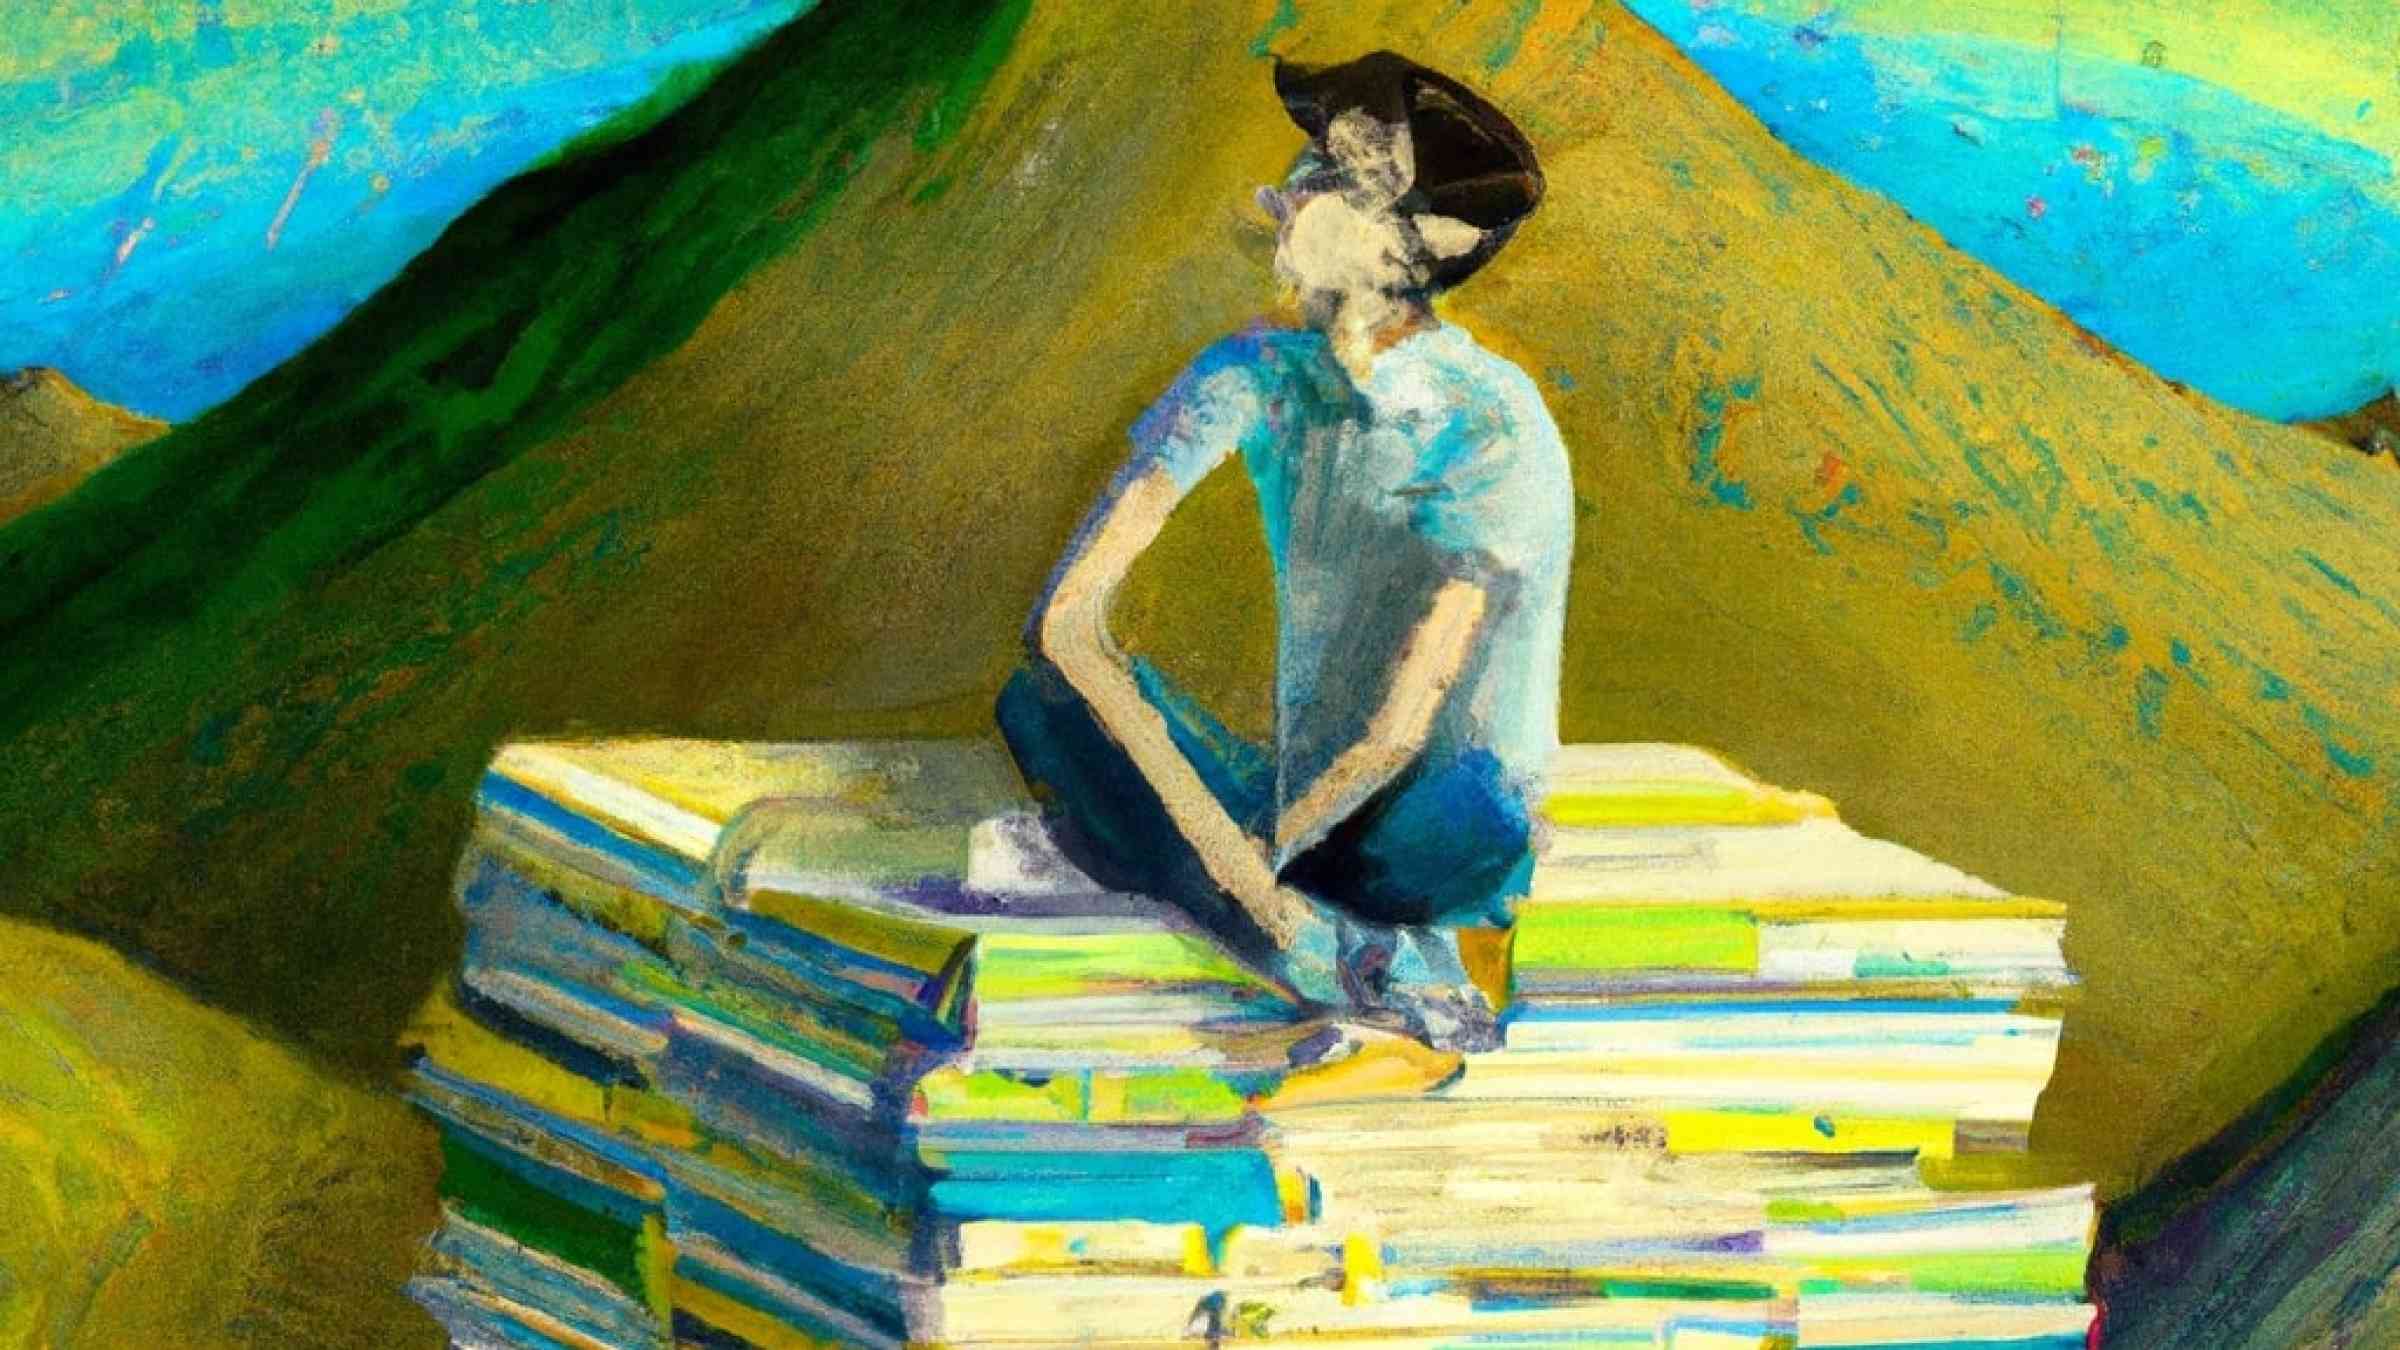 Surreal artistic image of a smiling high school student sitting a mountain of books thinking.